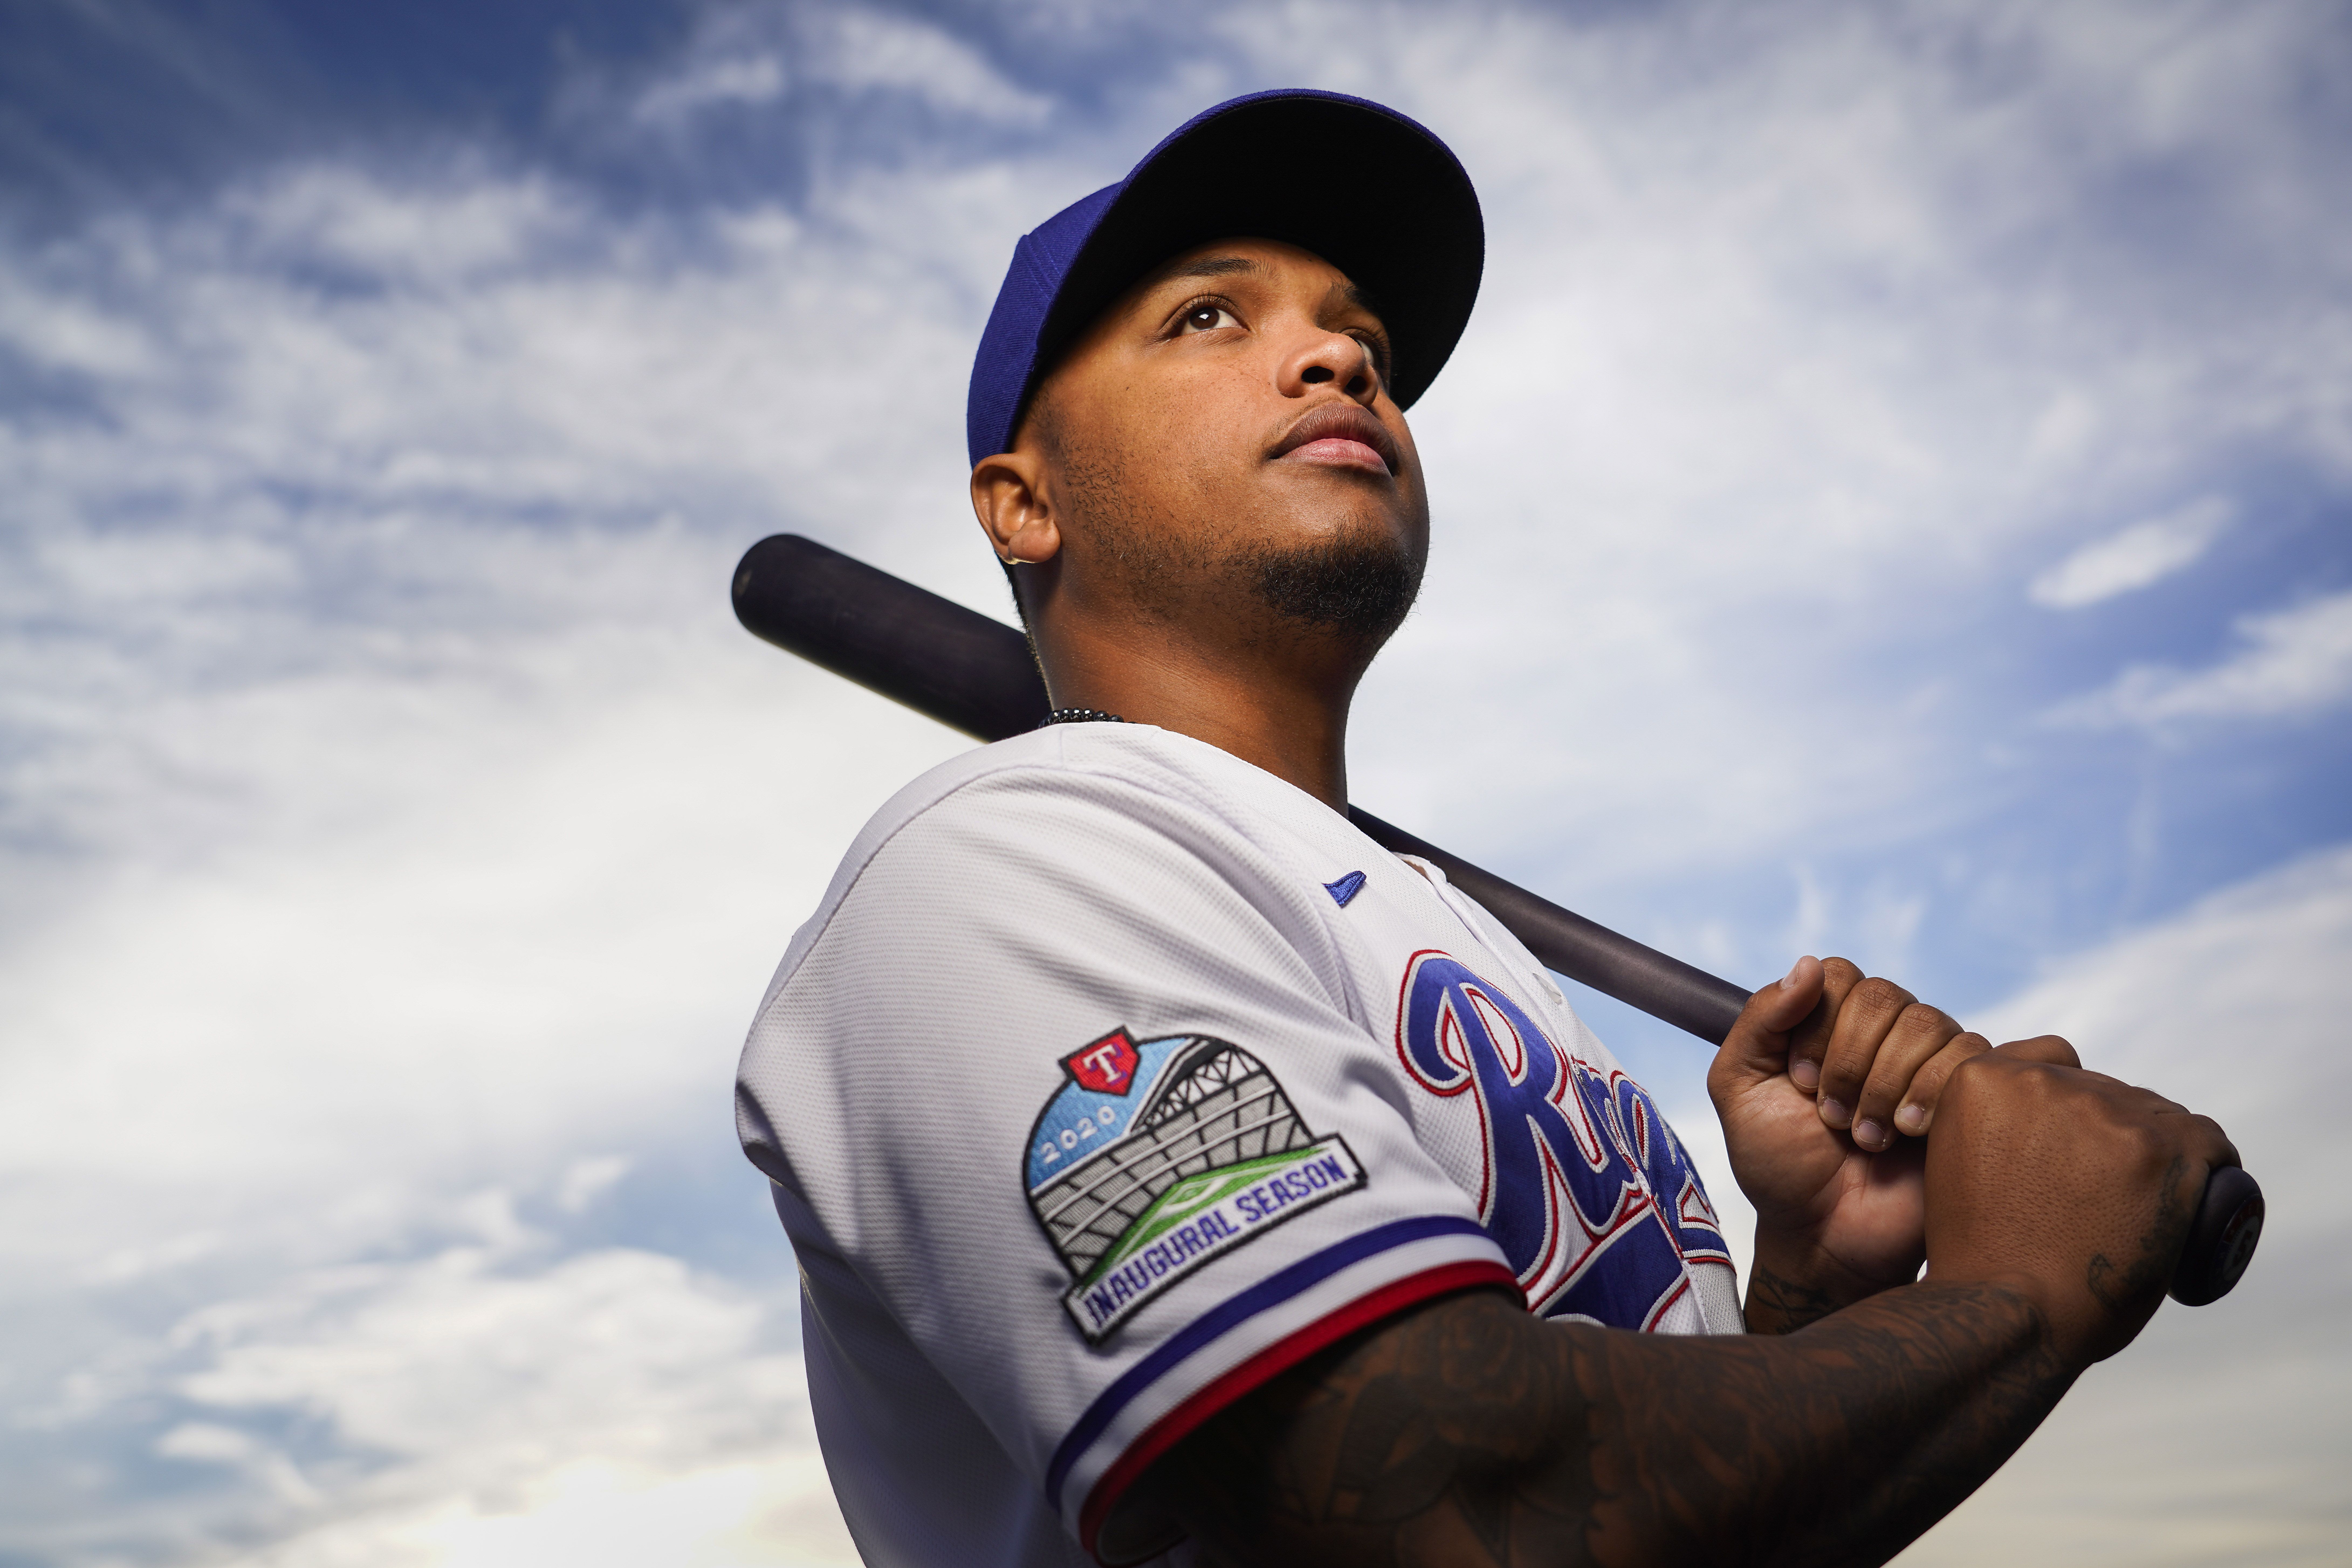 Rangers outfielder Willie Calhoun says it's time to have 'uncomfortable'  conversations about race